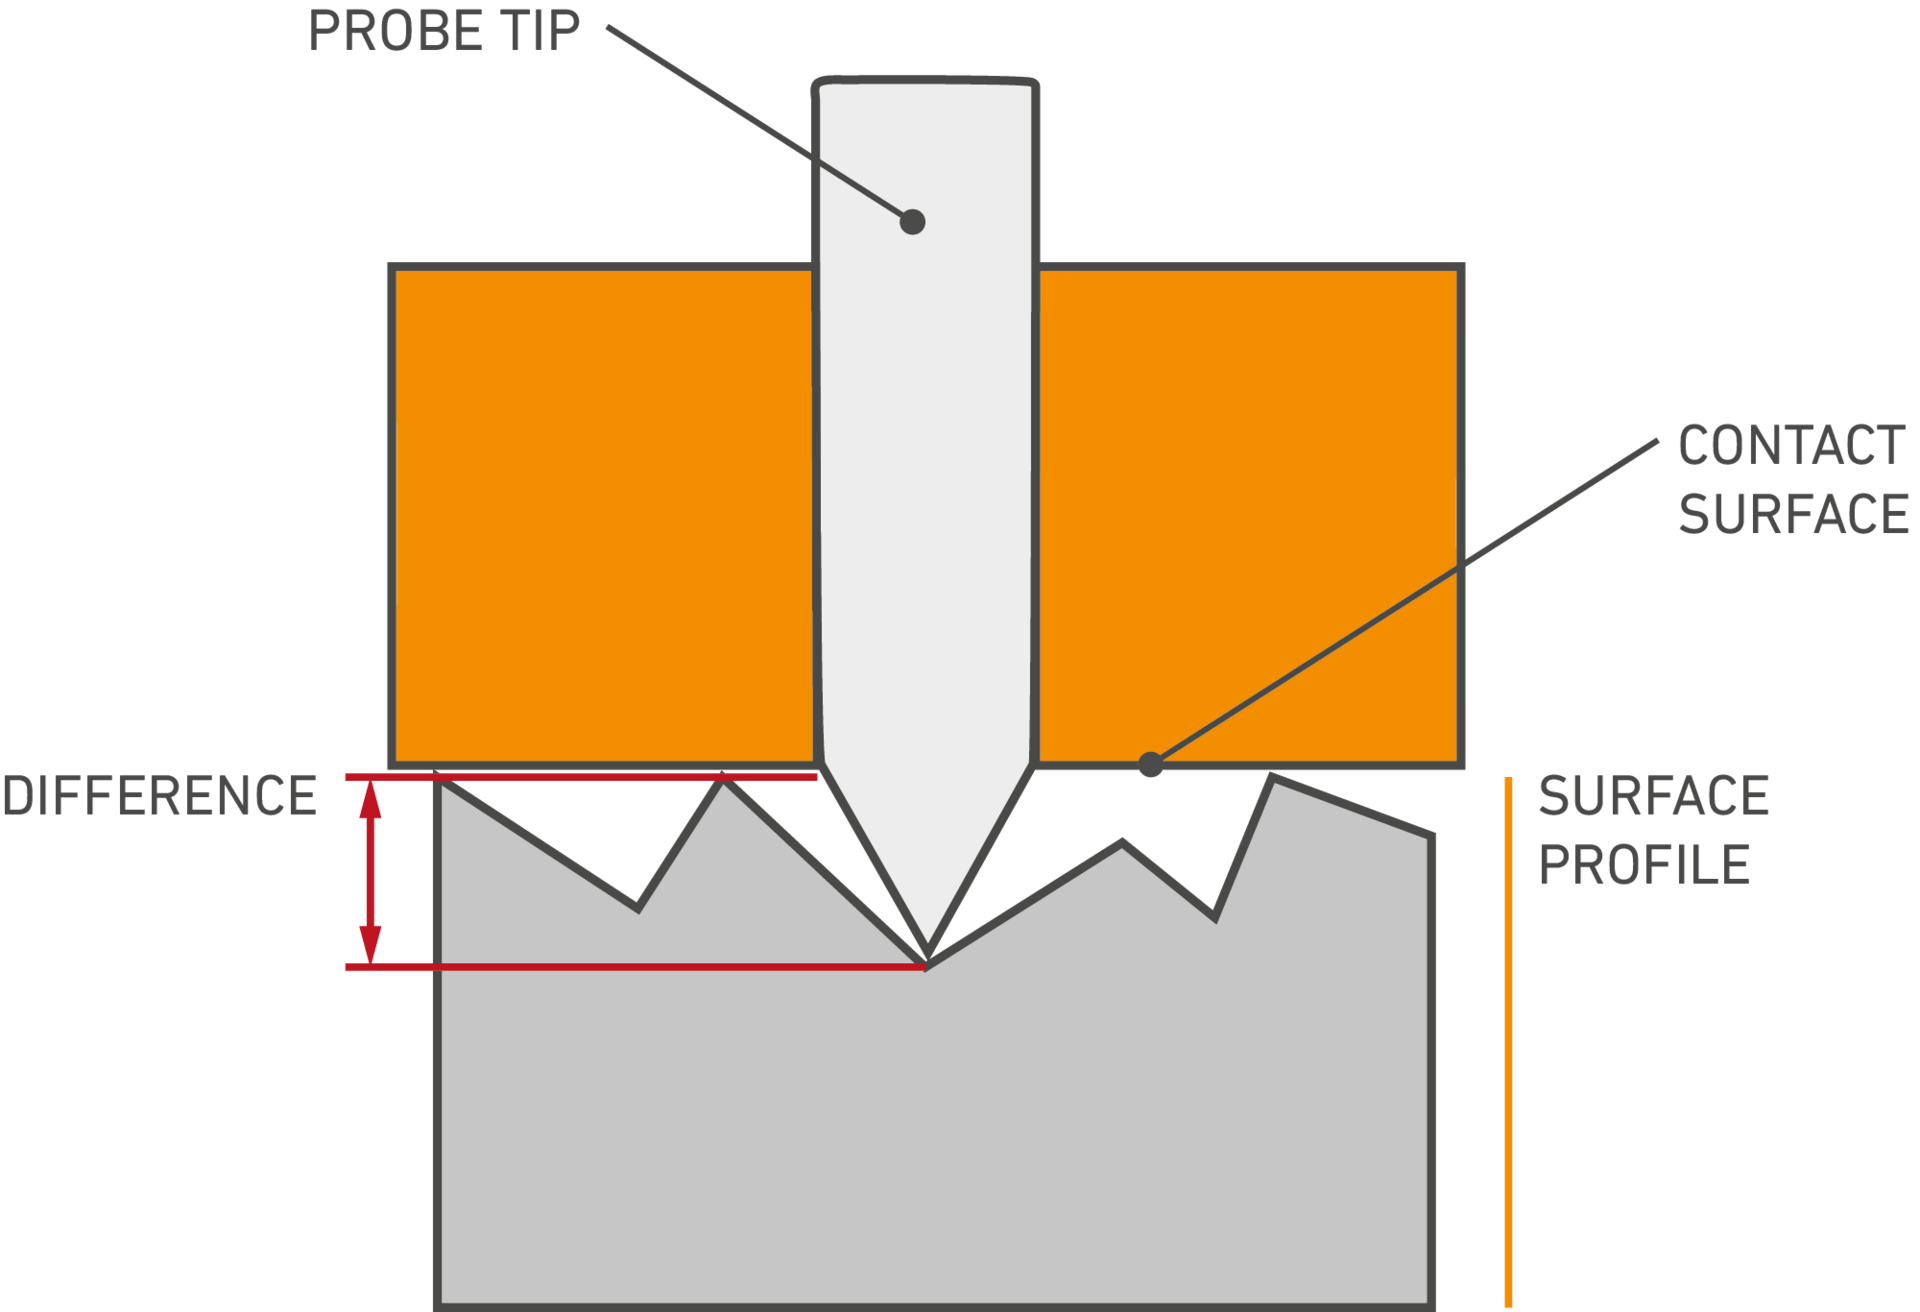 This is how the surface profile measurement works